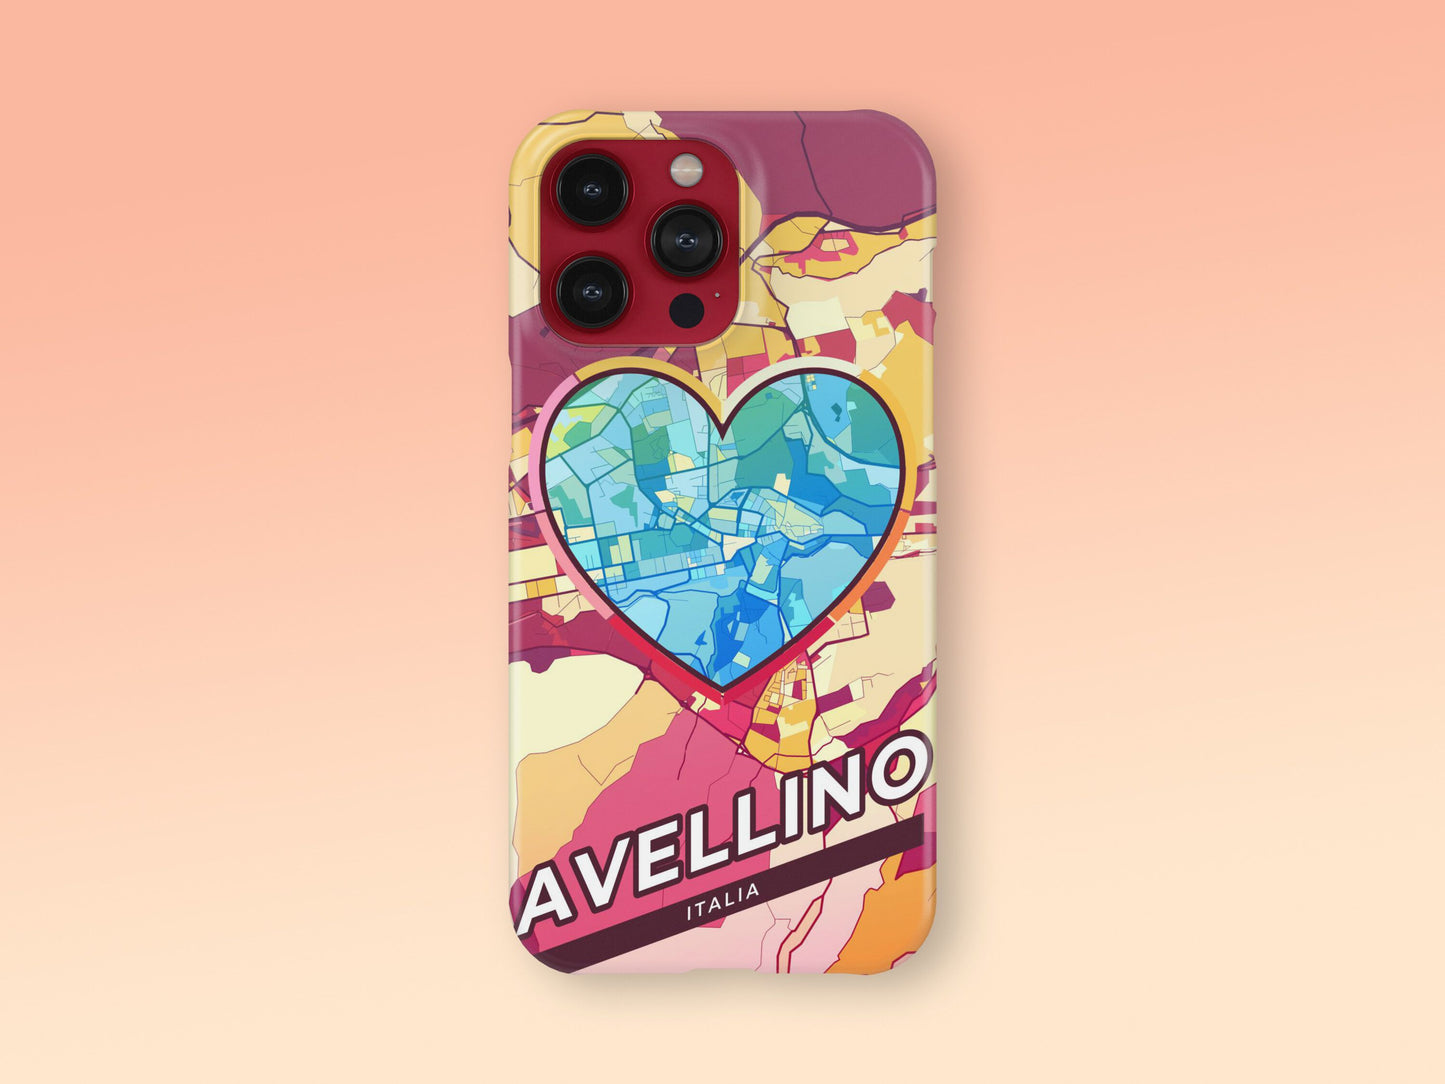 Avellino Italy slim phone case with colorful icon. Birthday, wedding or housewarming gift. Couple match cases. 2